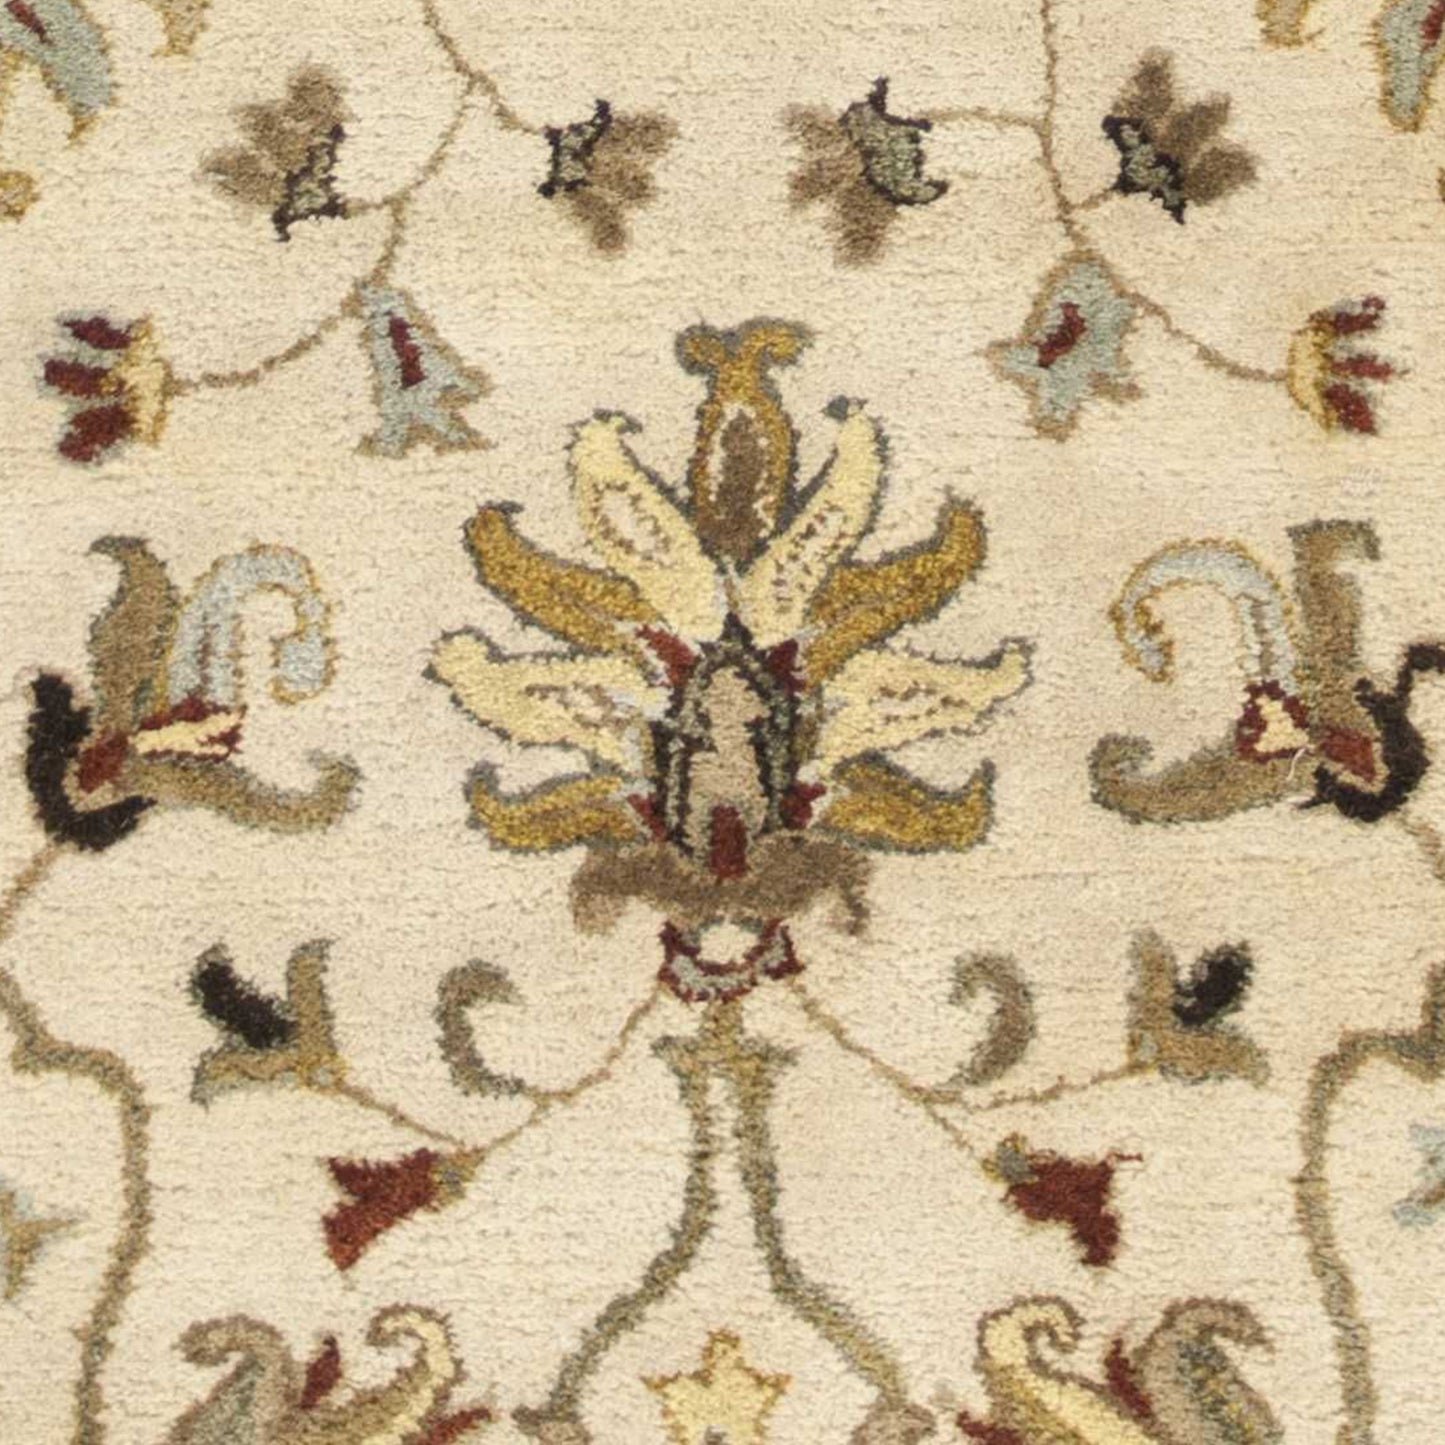 9' X 13' Beige Blue and Ivory Wool Floral Vines Hand Tufted Area Rug